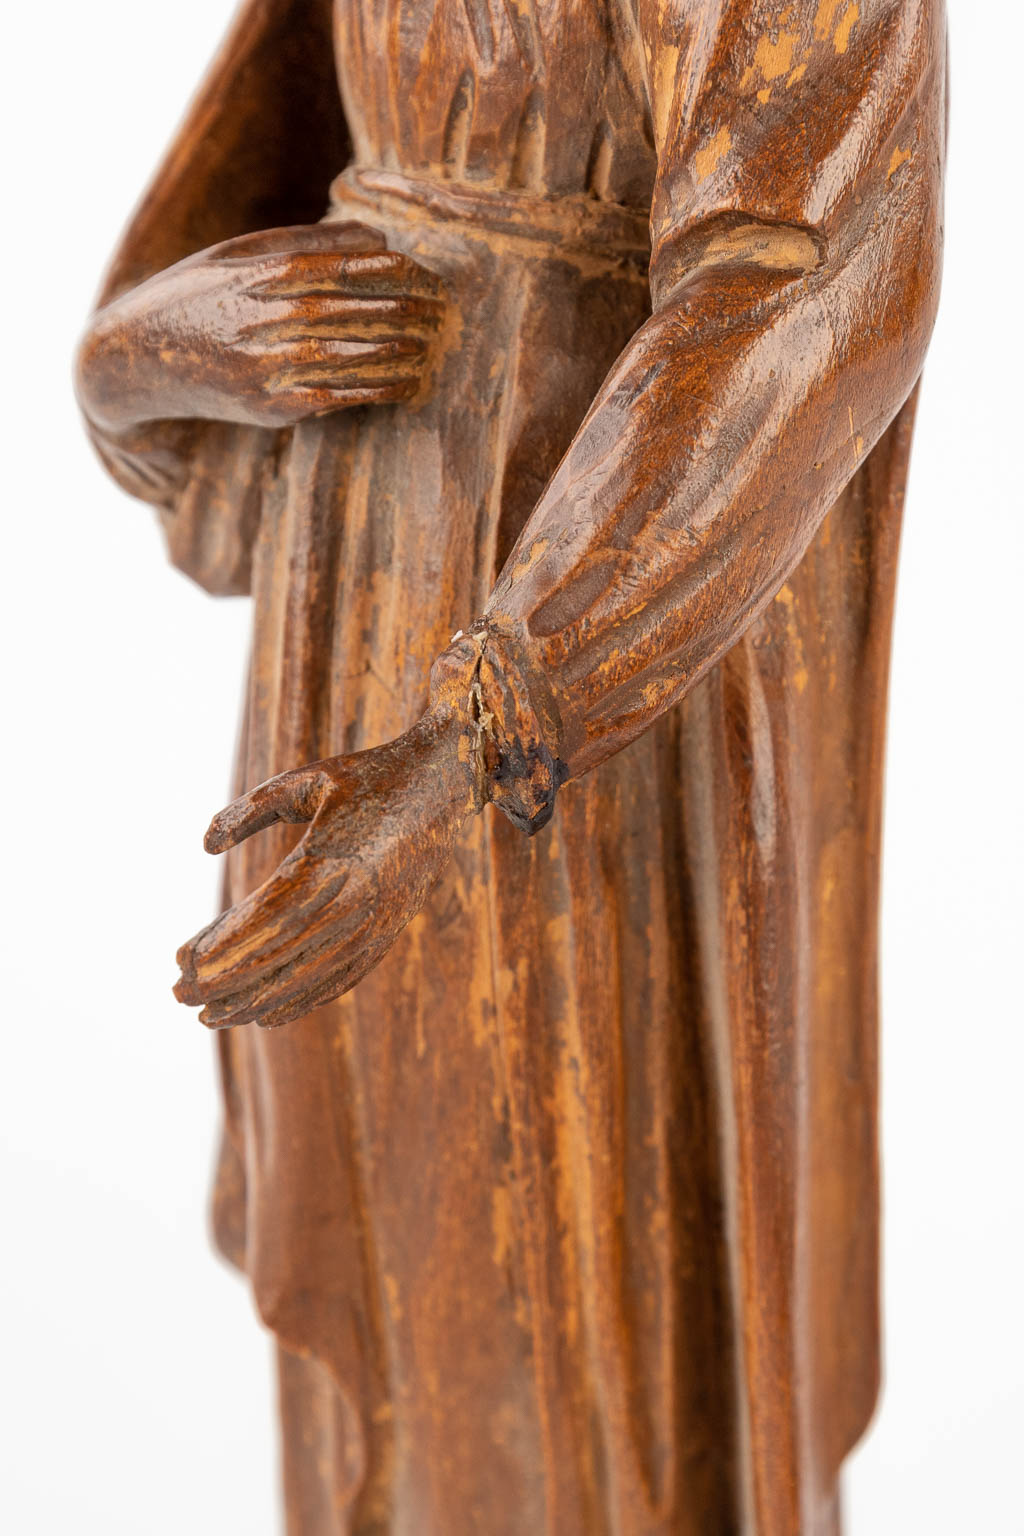 A set of two figurines of Mary and Joseph, sculptured wood, 17th/18th C. (D:7 x W:8 x H:25 cm)